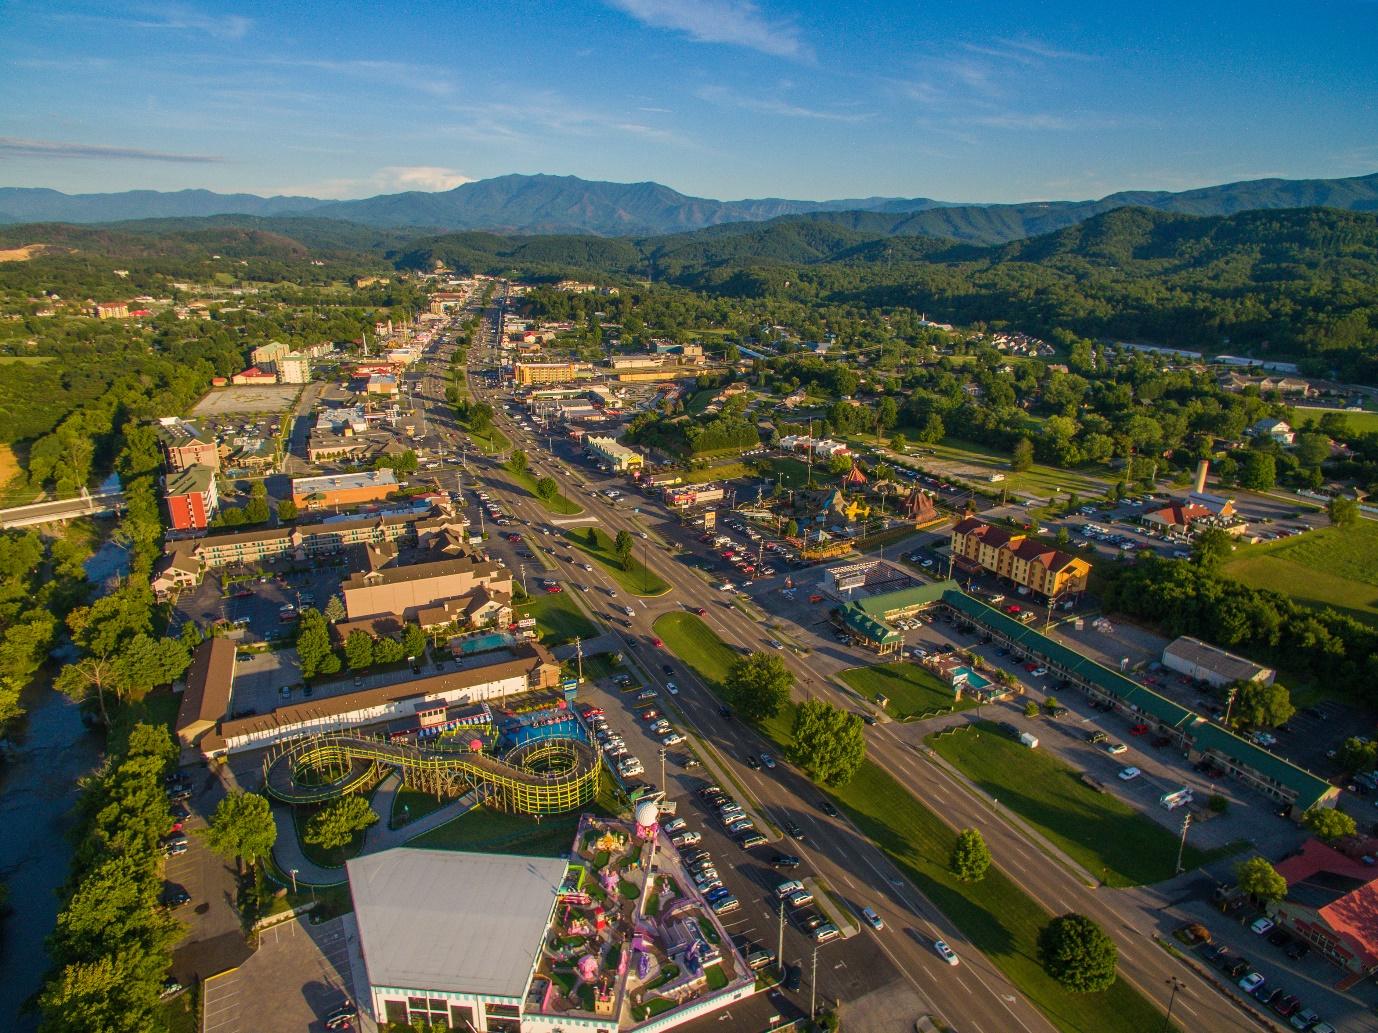 12 Tips to Make Your Pigeon Forge Trip Stress-Free